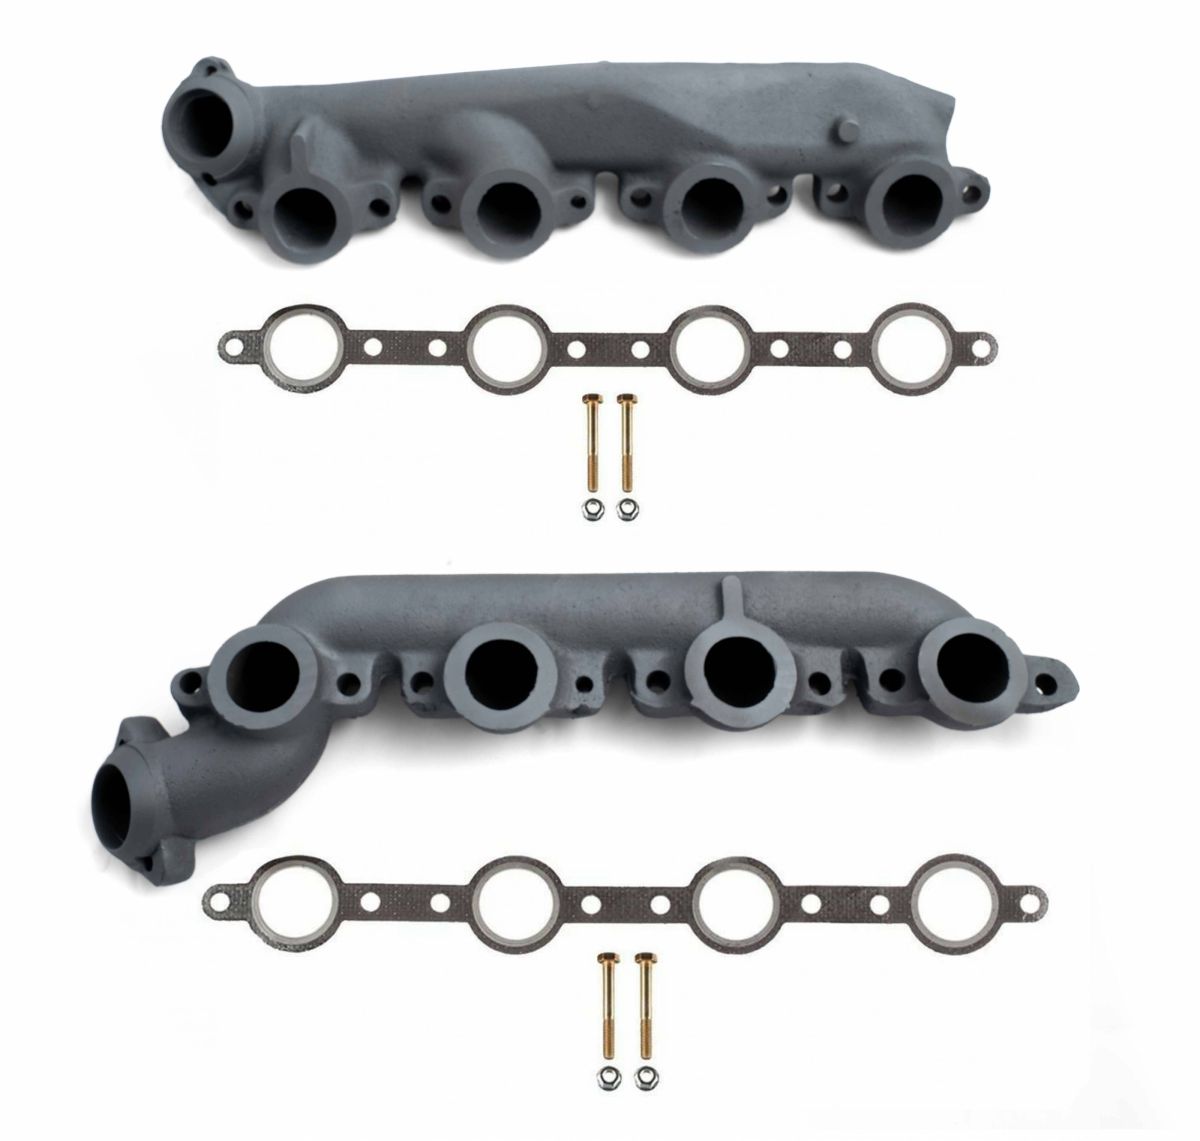 Rudy's Performance Parts - Rudy's High Temp Coated Exhaust Manifold Set For 1999-2003 Ford 7.3L Powerstroke